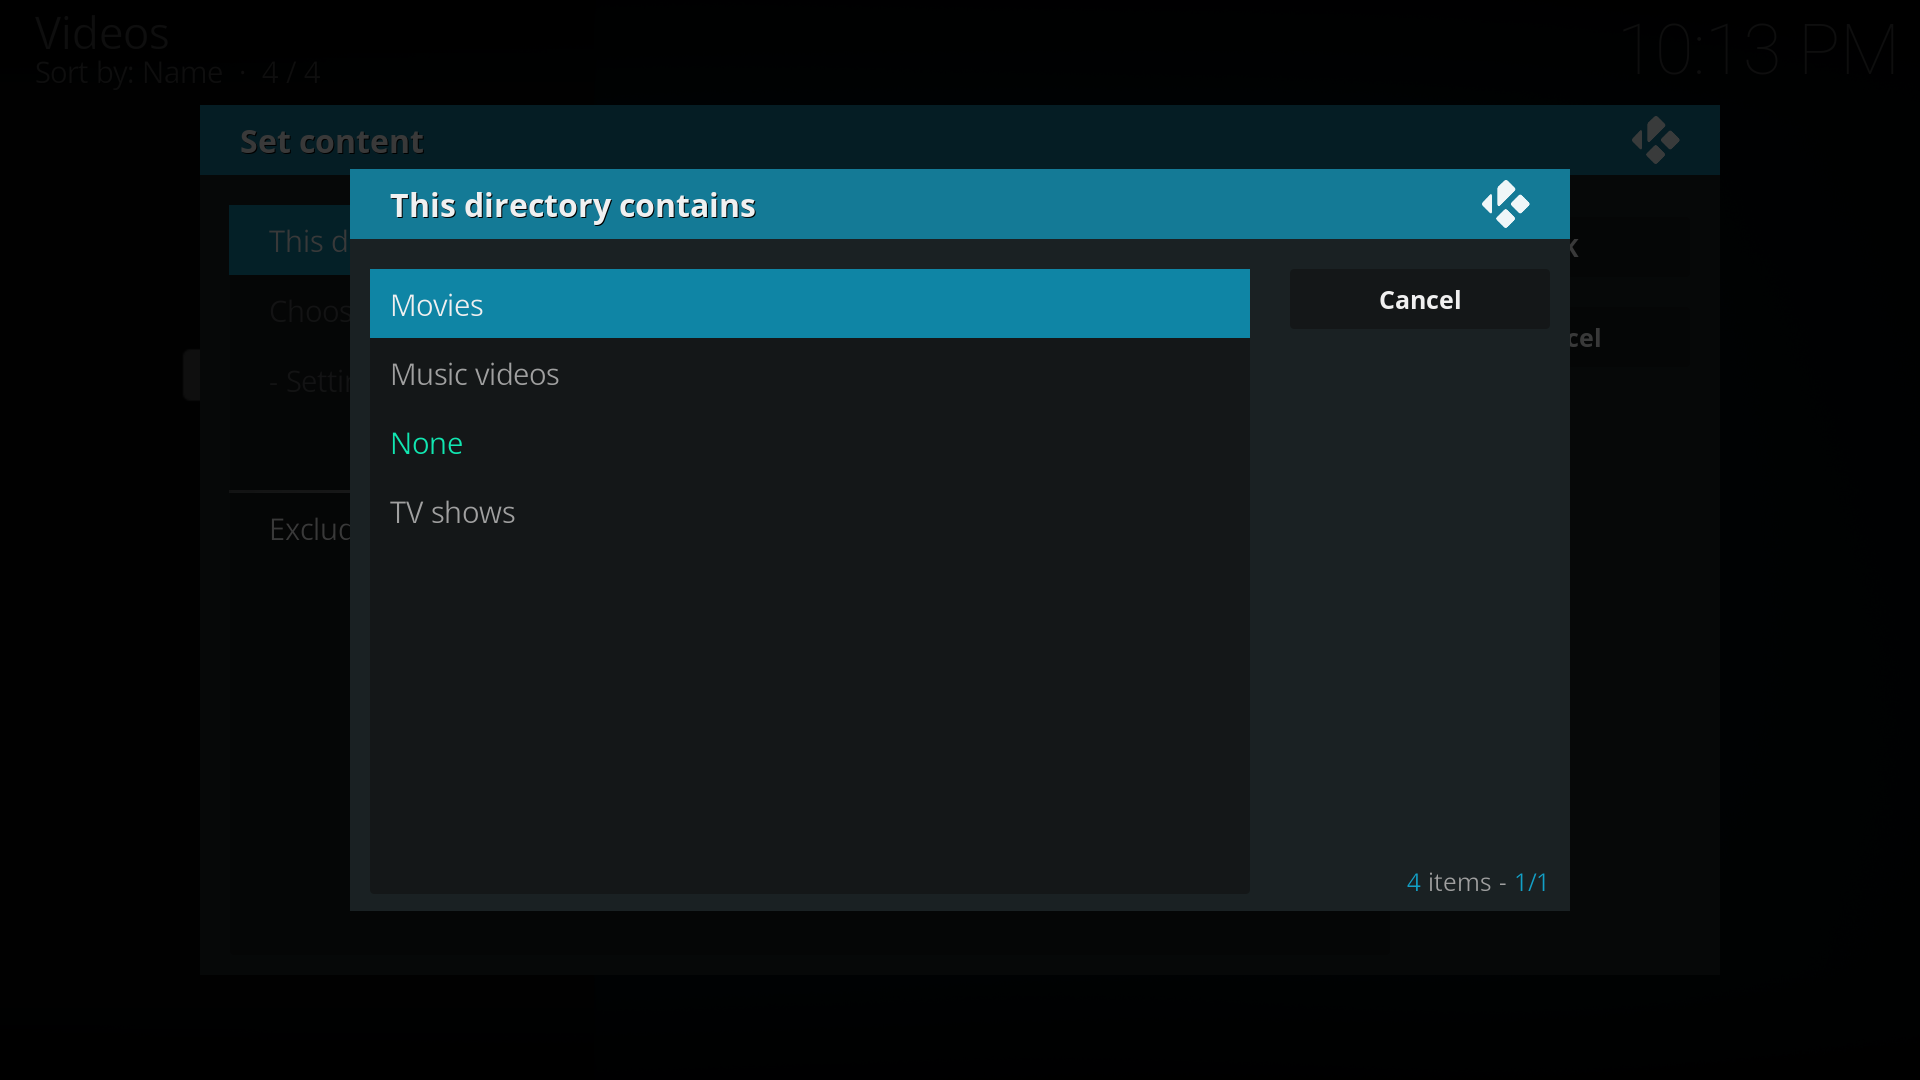 Step 6: The set content window will display, this is where you tell Kodi what type of media is in the folder. Select This directory contains and in the new window select the media type(in this example movies).